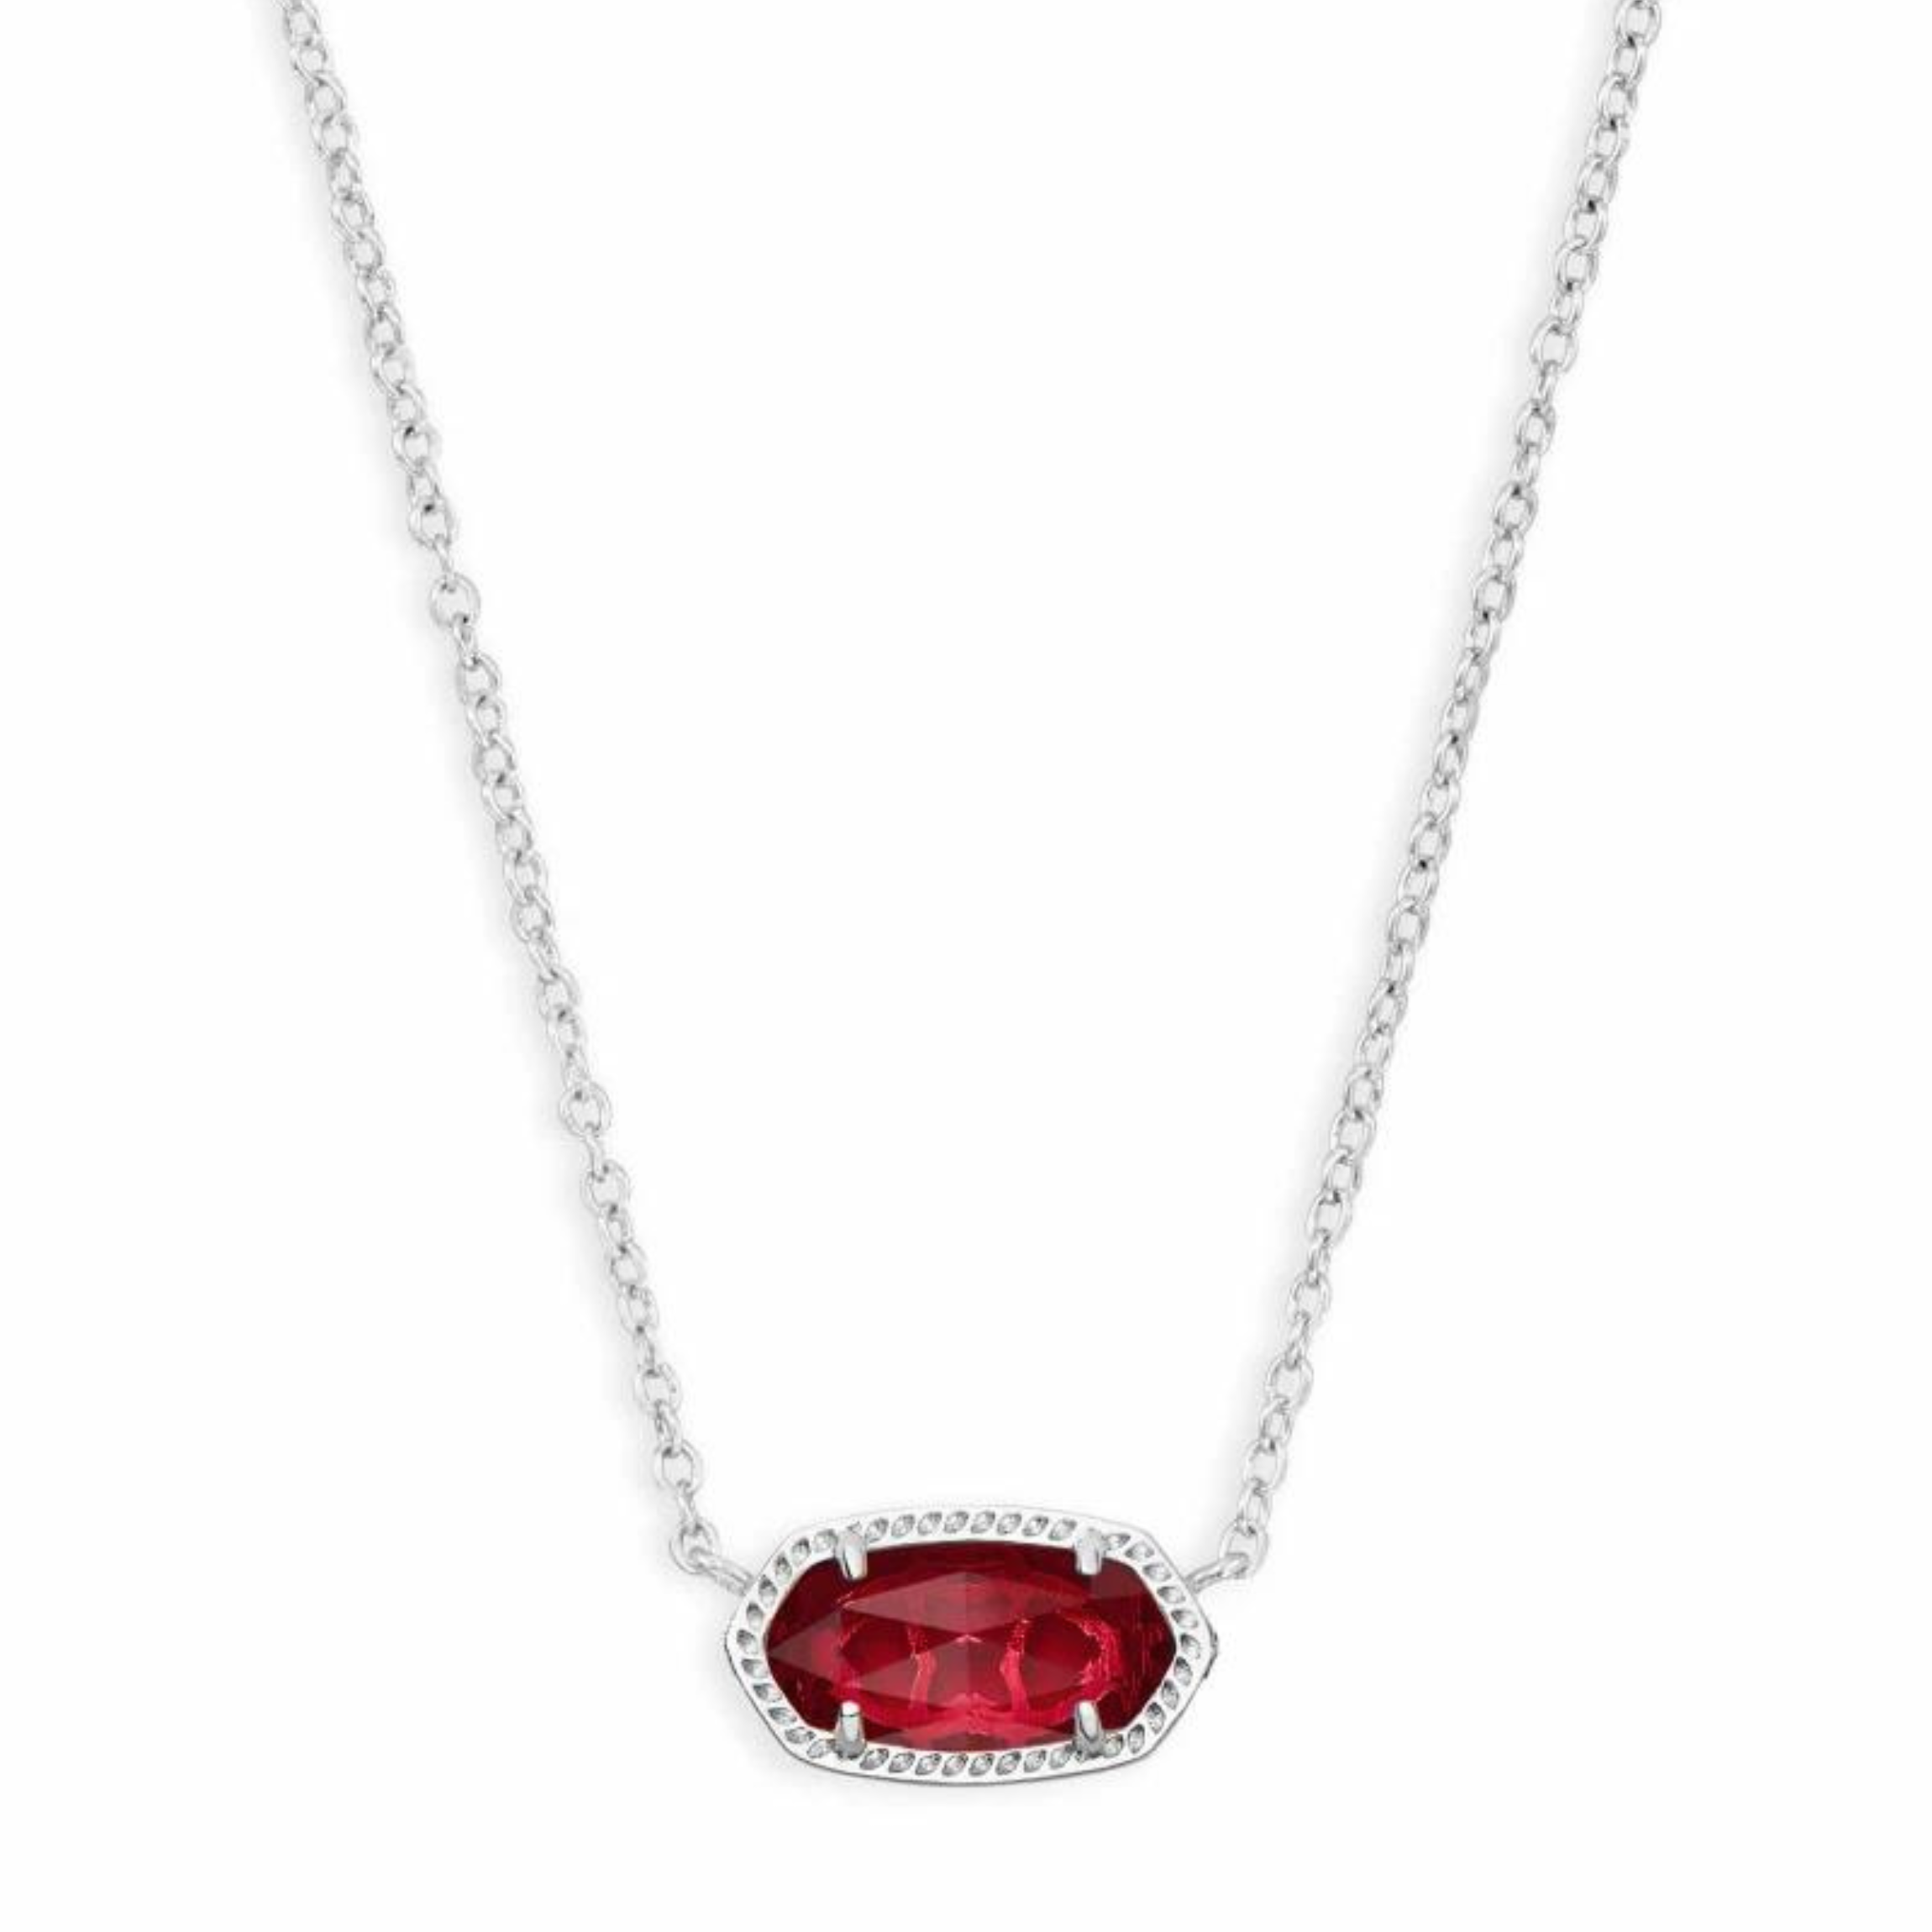 Silver necklace with berry colored glass pendant, pictured on a white background.